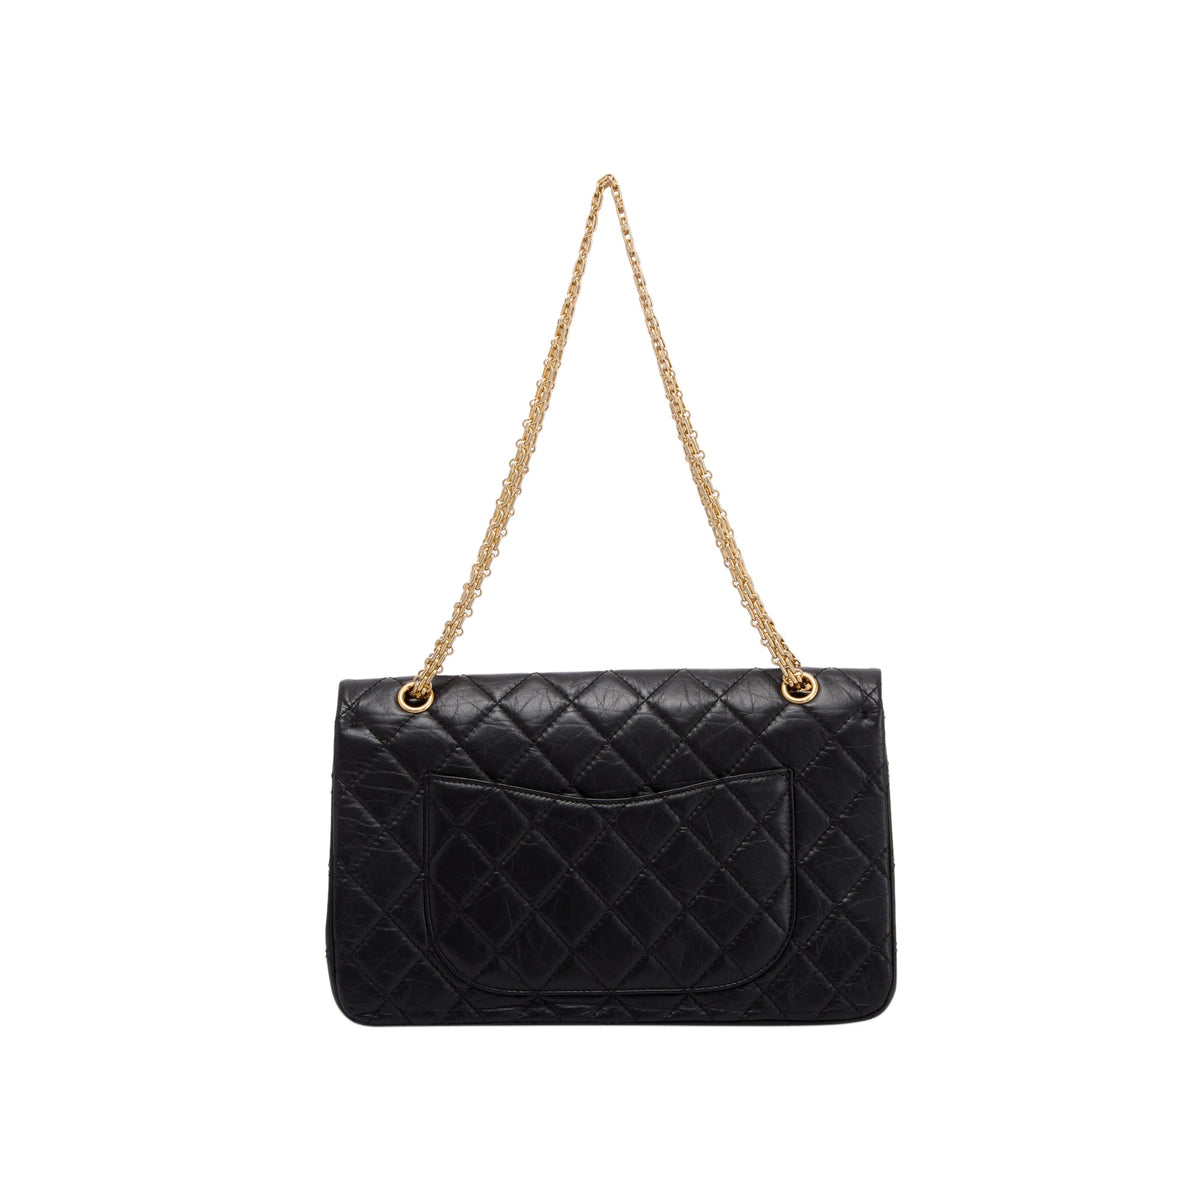 Have a look through our selection of Chanel 2.55 Reissue 227